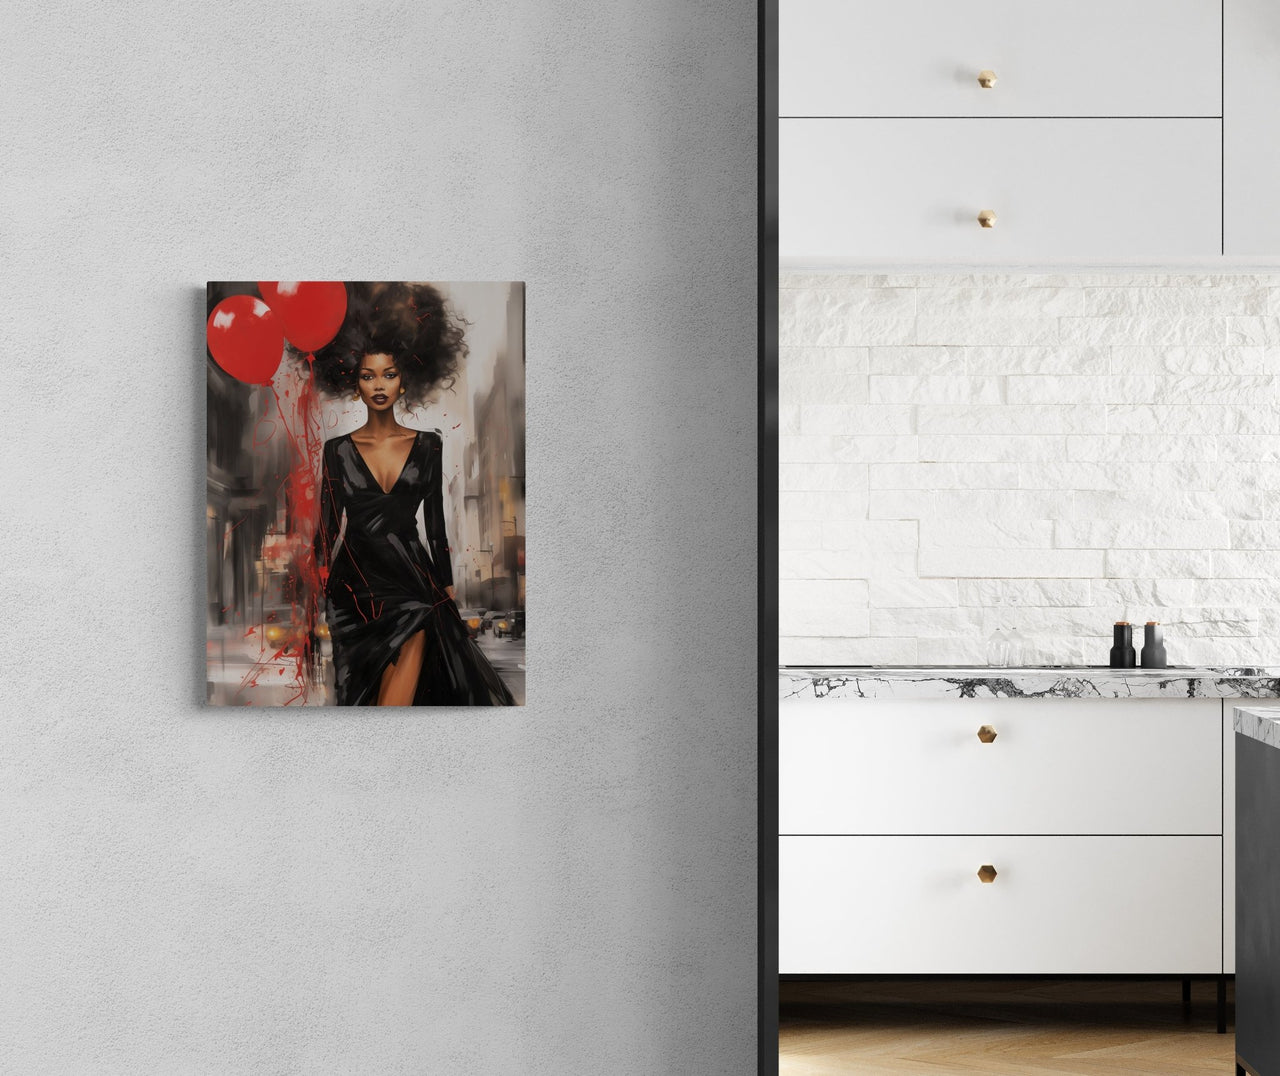 African-American-woman-with-red-balloons-ultra-thin-canvas-print-urban-elegance